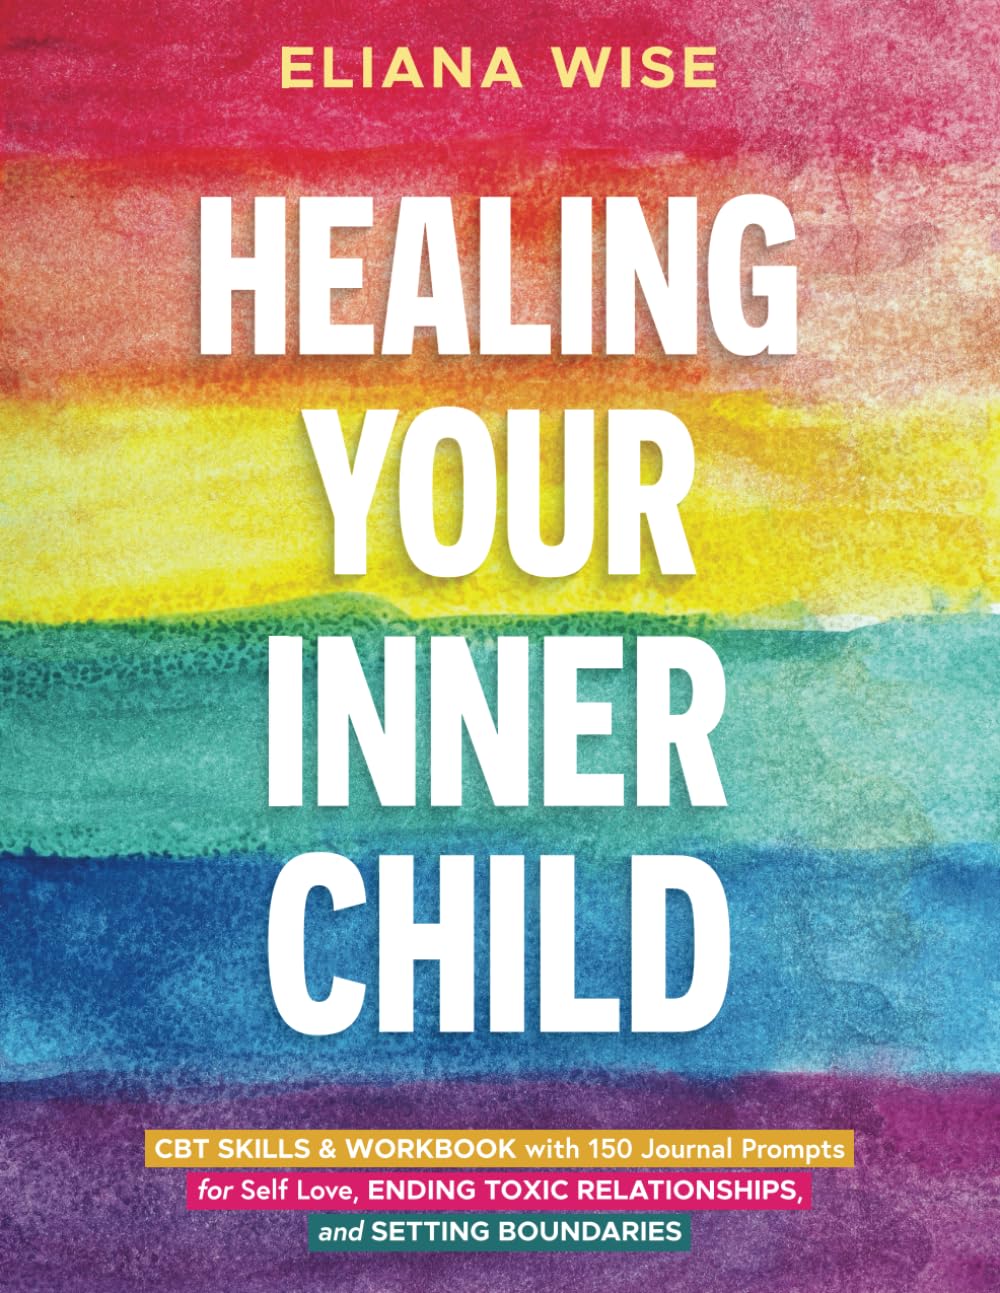 Healing Your Inner Child: CBT Skills & Workbook with 150 Journal Prompts for Self Love, Ending Toxic Relationships, and Setting Boundaries (Self Love Workbooks)